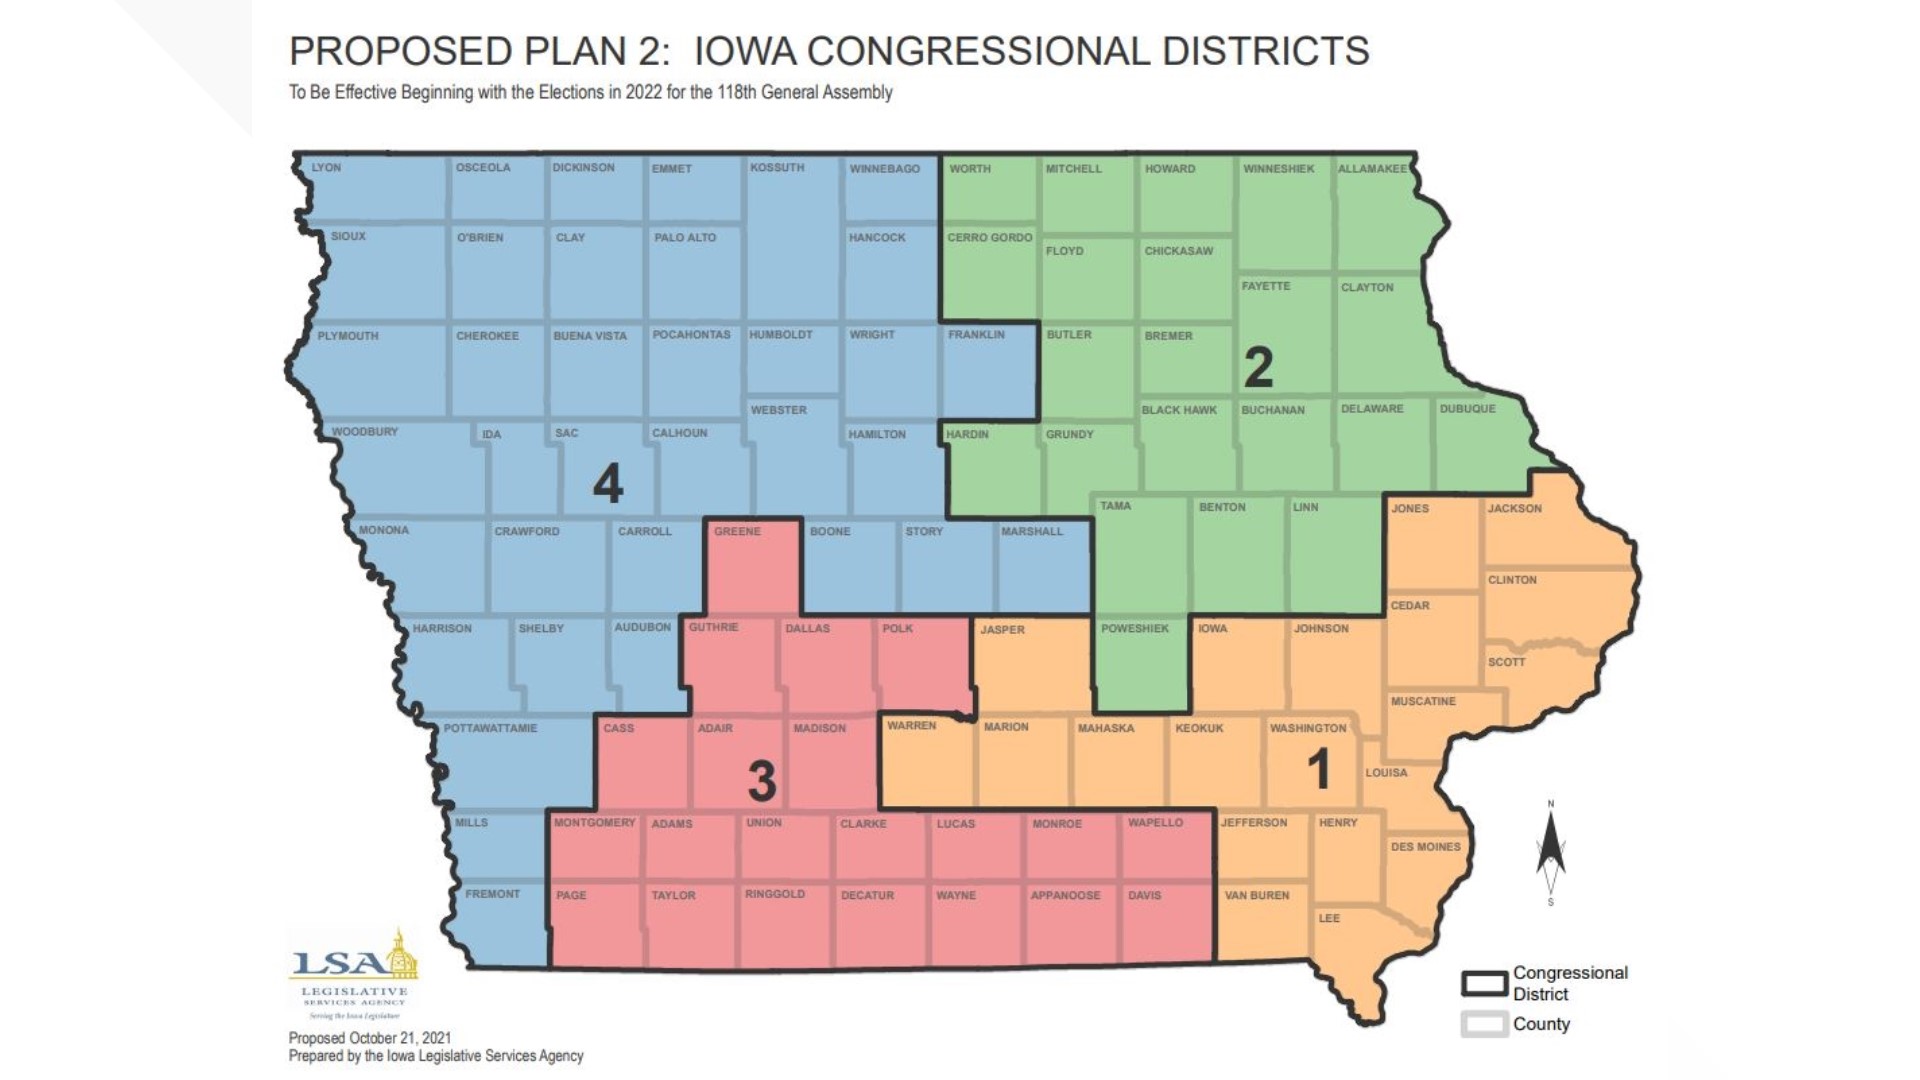 The Iowa Senate voted down the first round of maps along party lines on Oct. 5.